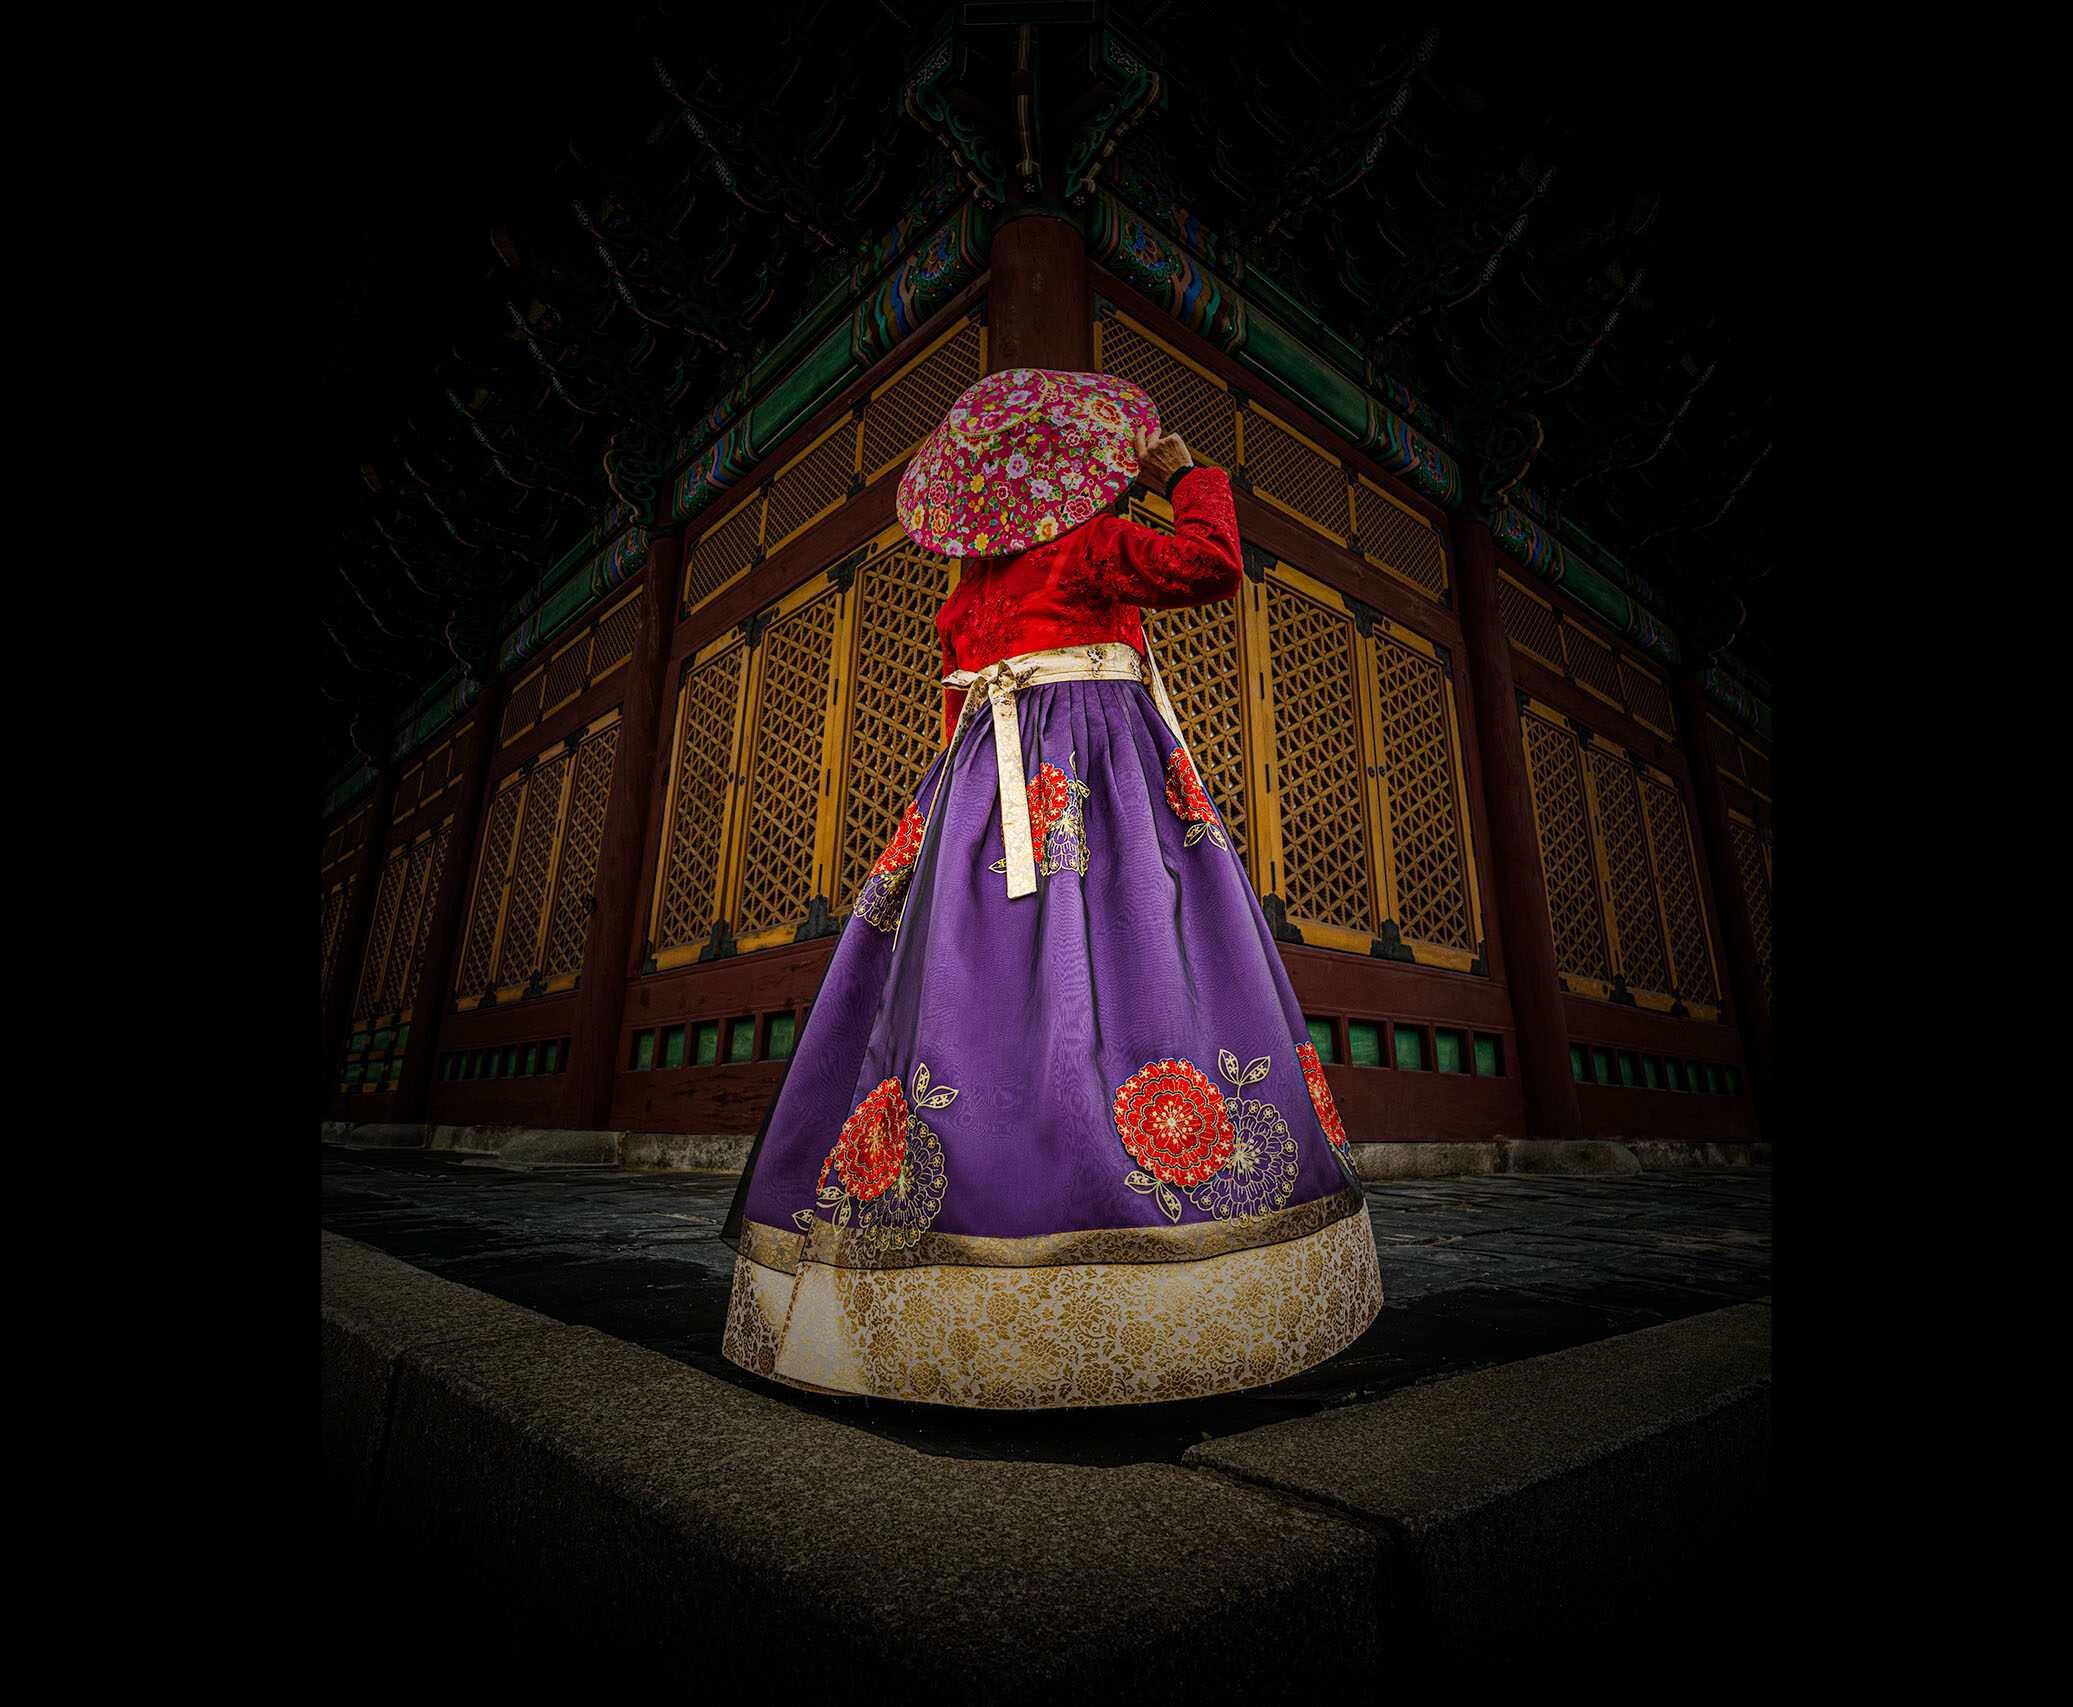 Woman in Red and Purple Hanbok standing in front of Deoksugung Palace in Seoul, Korea.